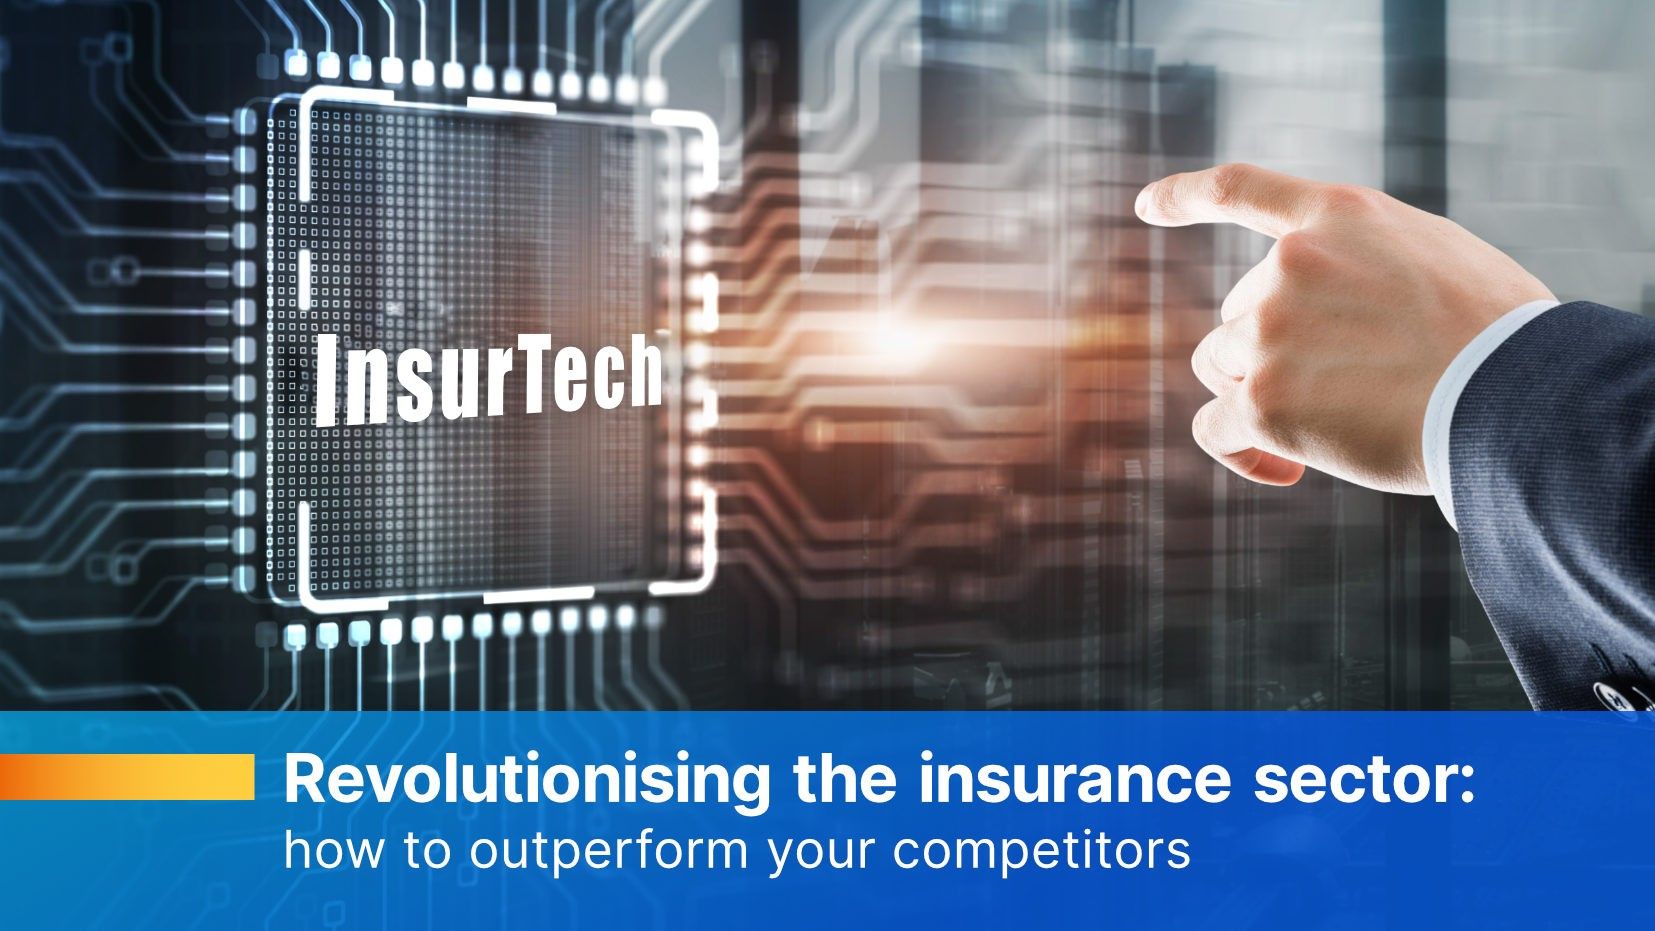 Revolutionising the insurance sector: how to outperform your competitors